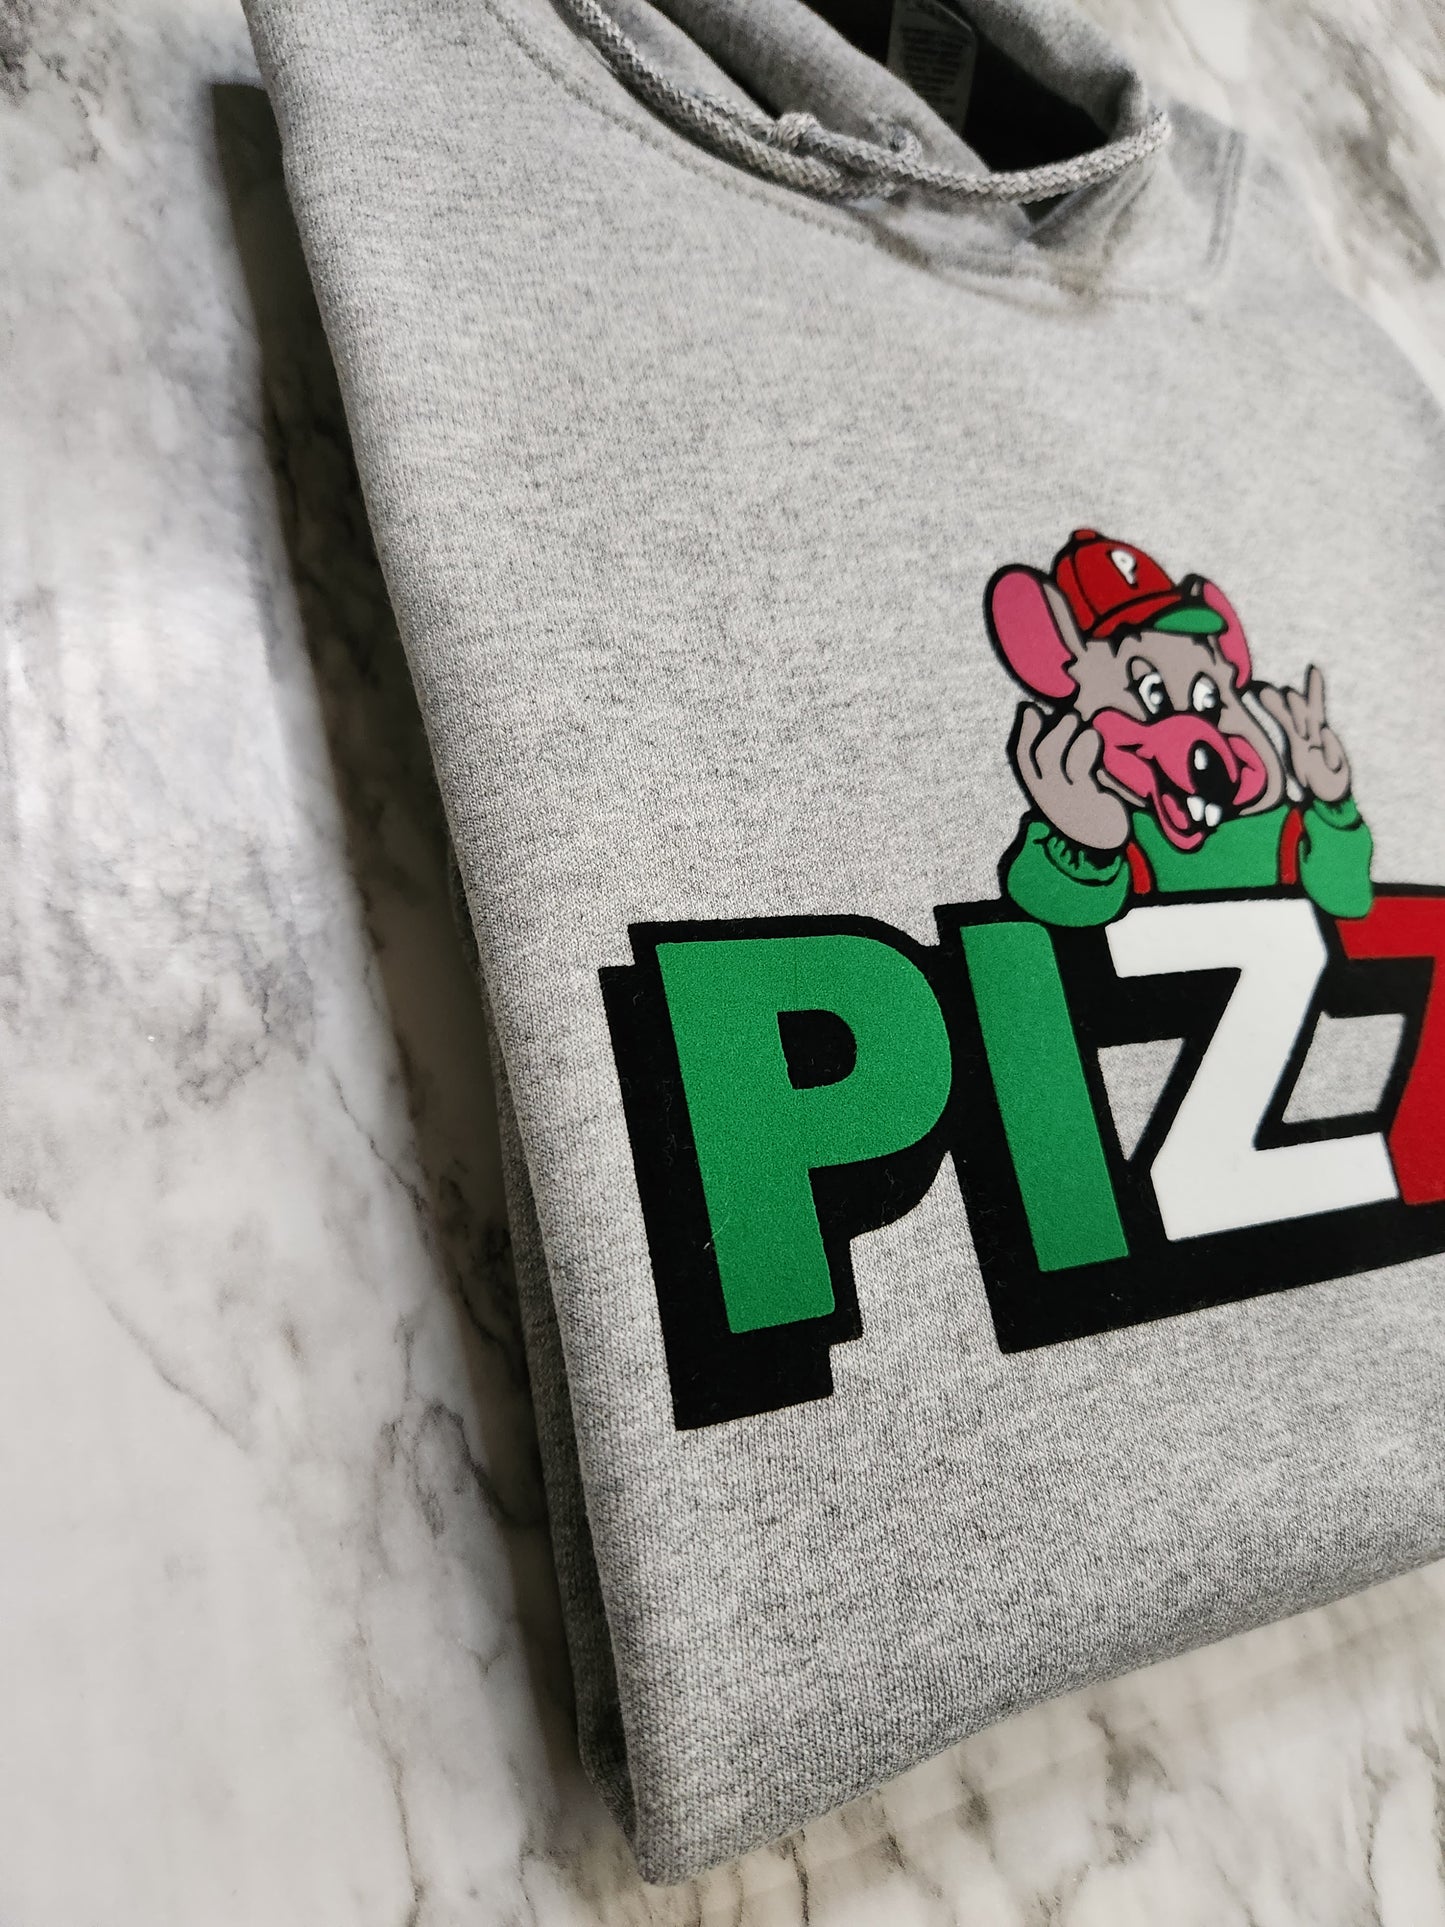 AZZIP Bootleg Hoodie - Centre Ave Clothing Co.